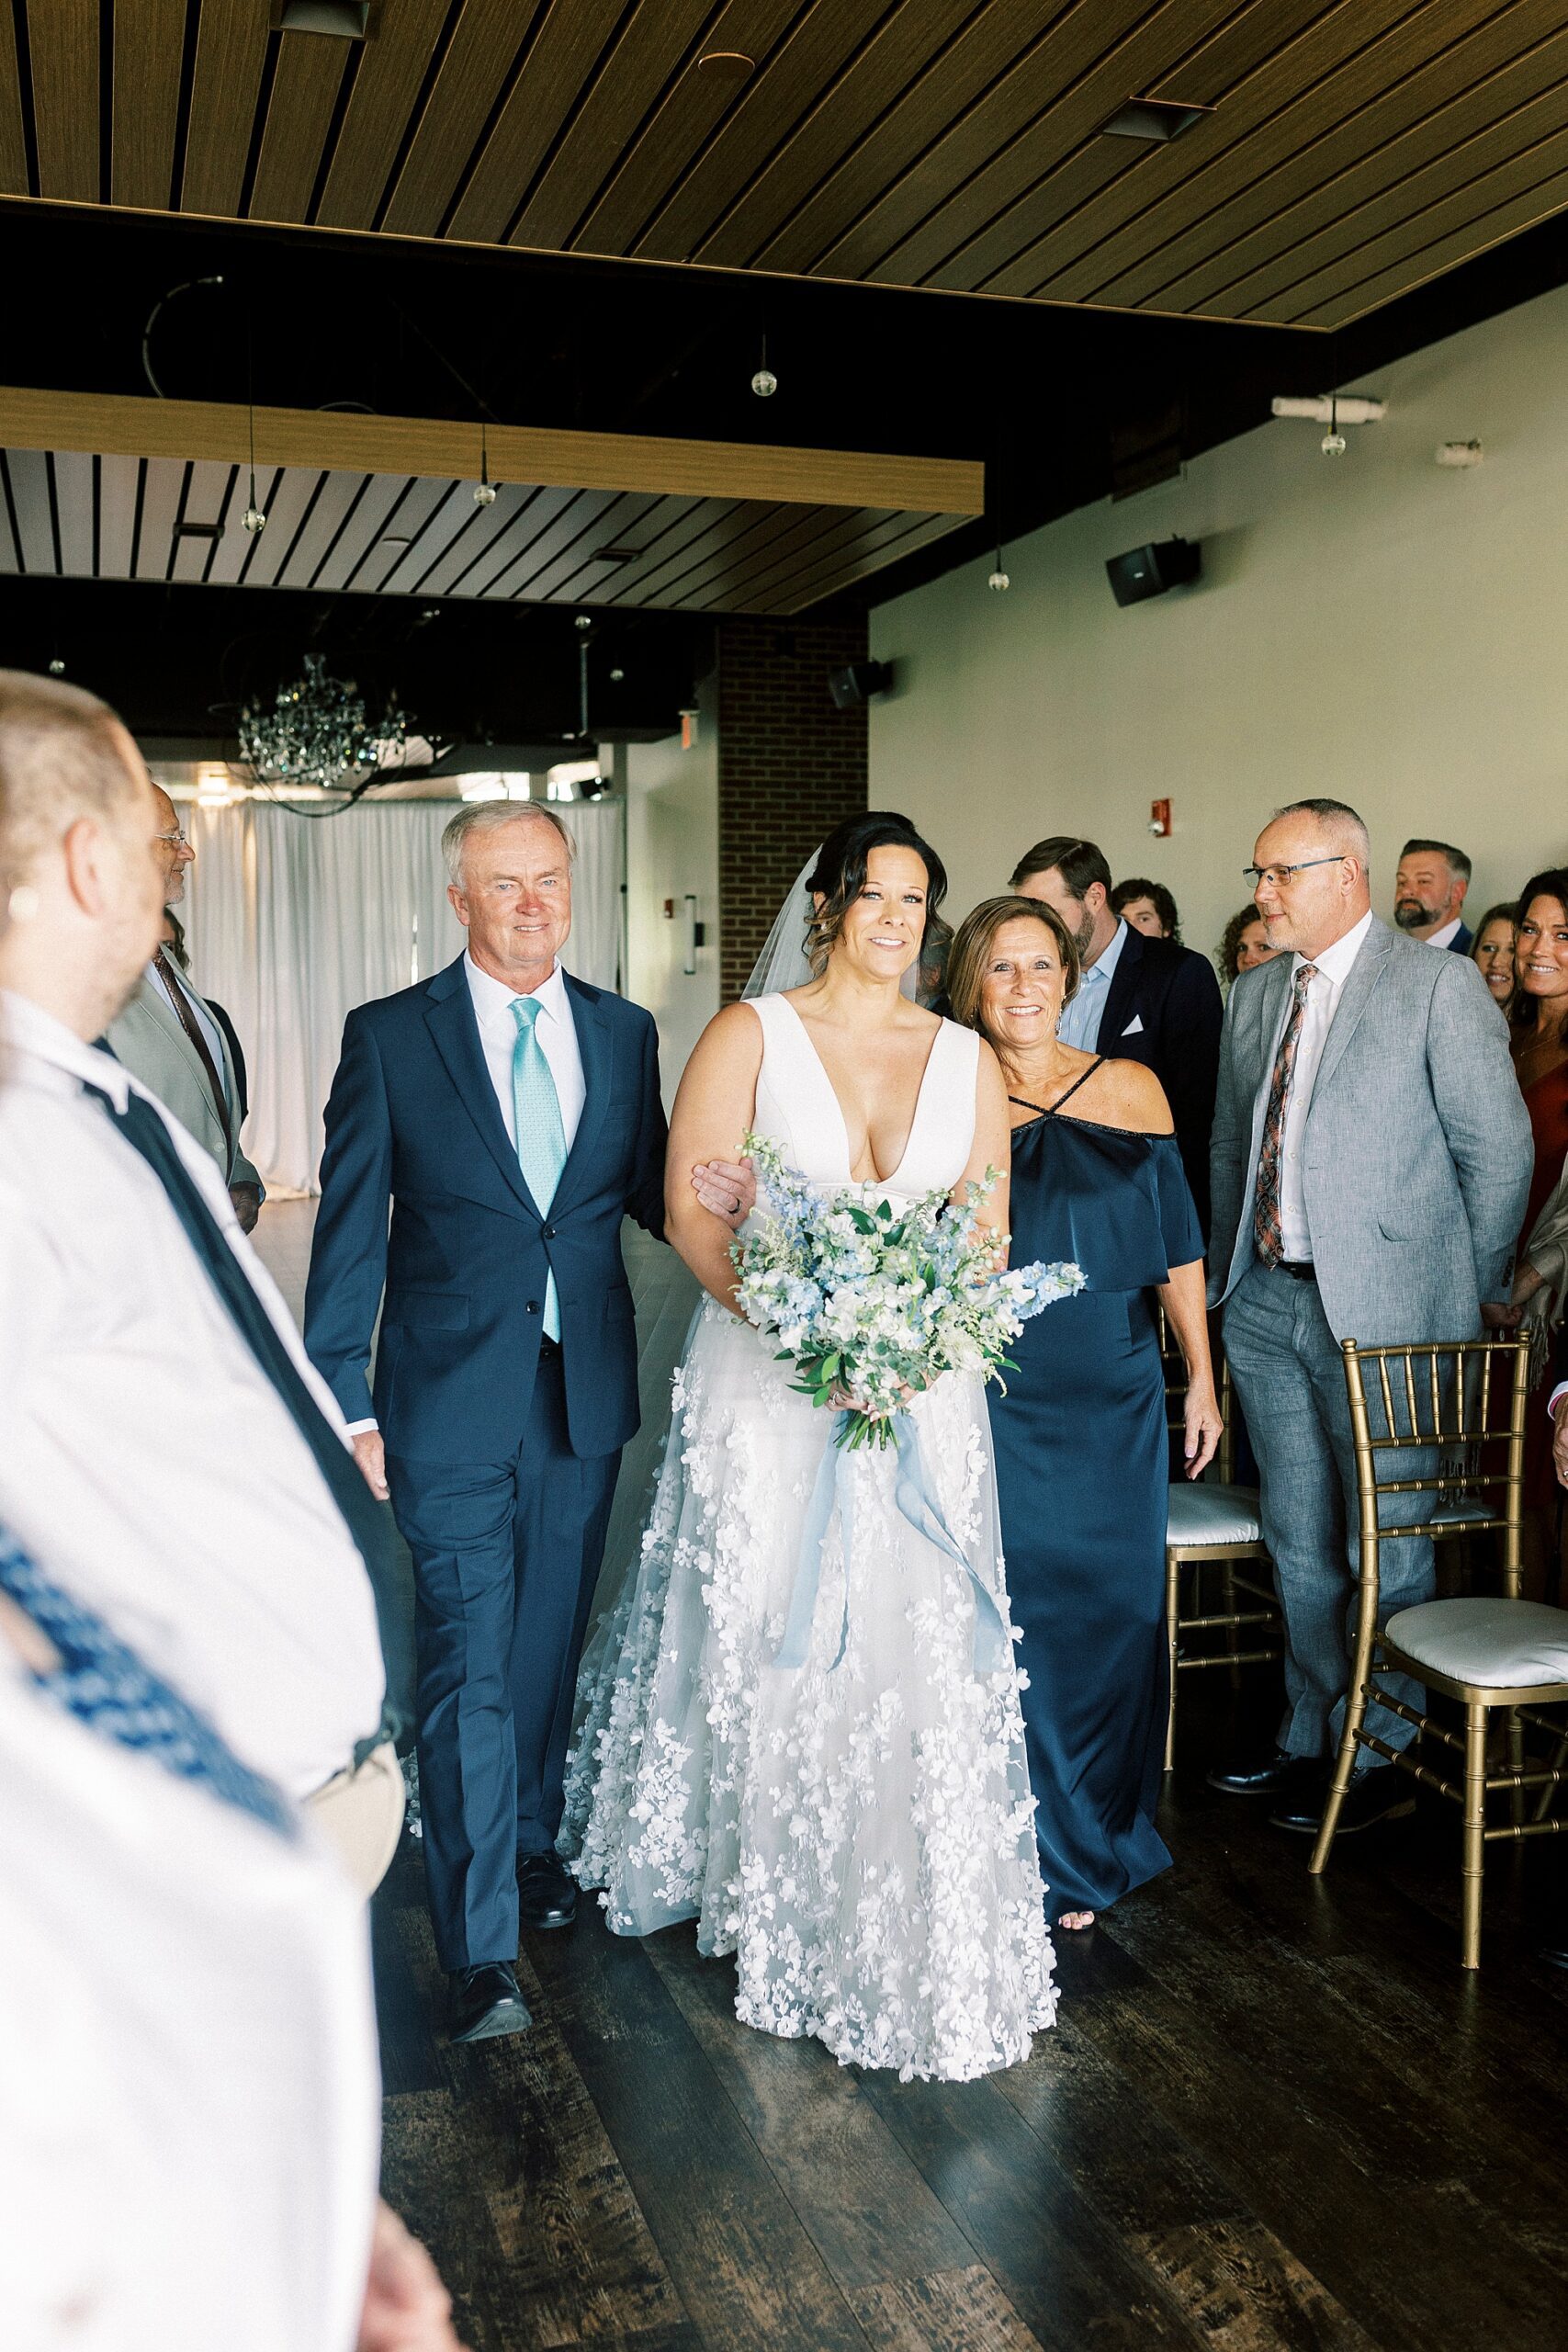 bride walks down aisle with father in blue suit carrying bouquet of blue and white flowers